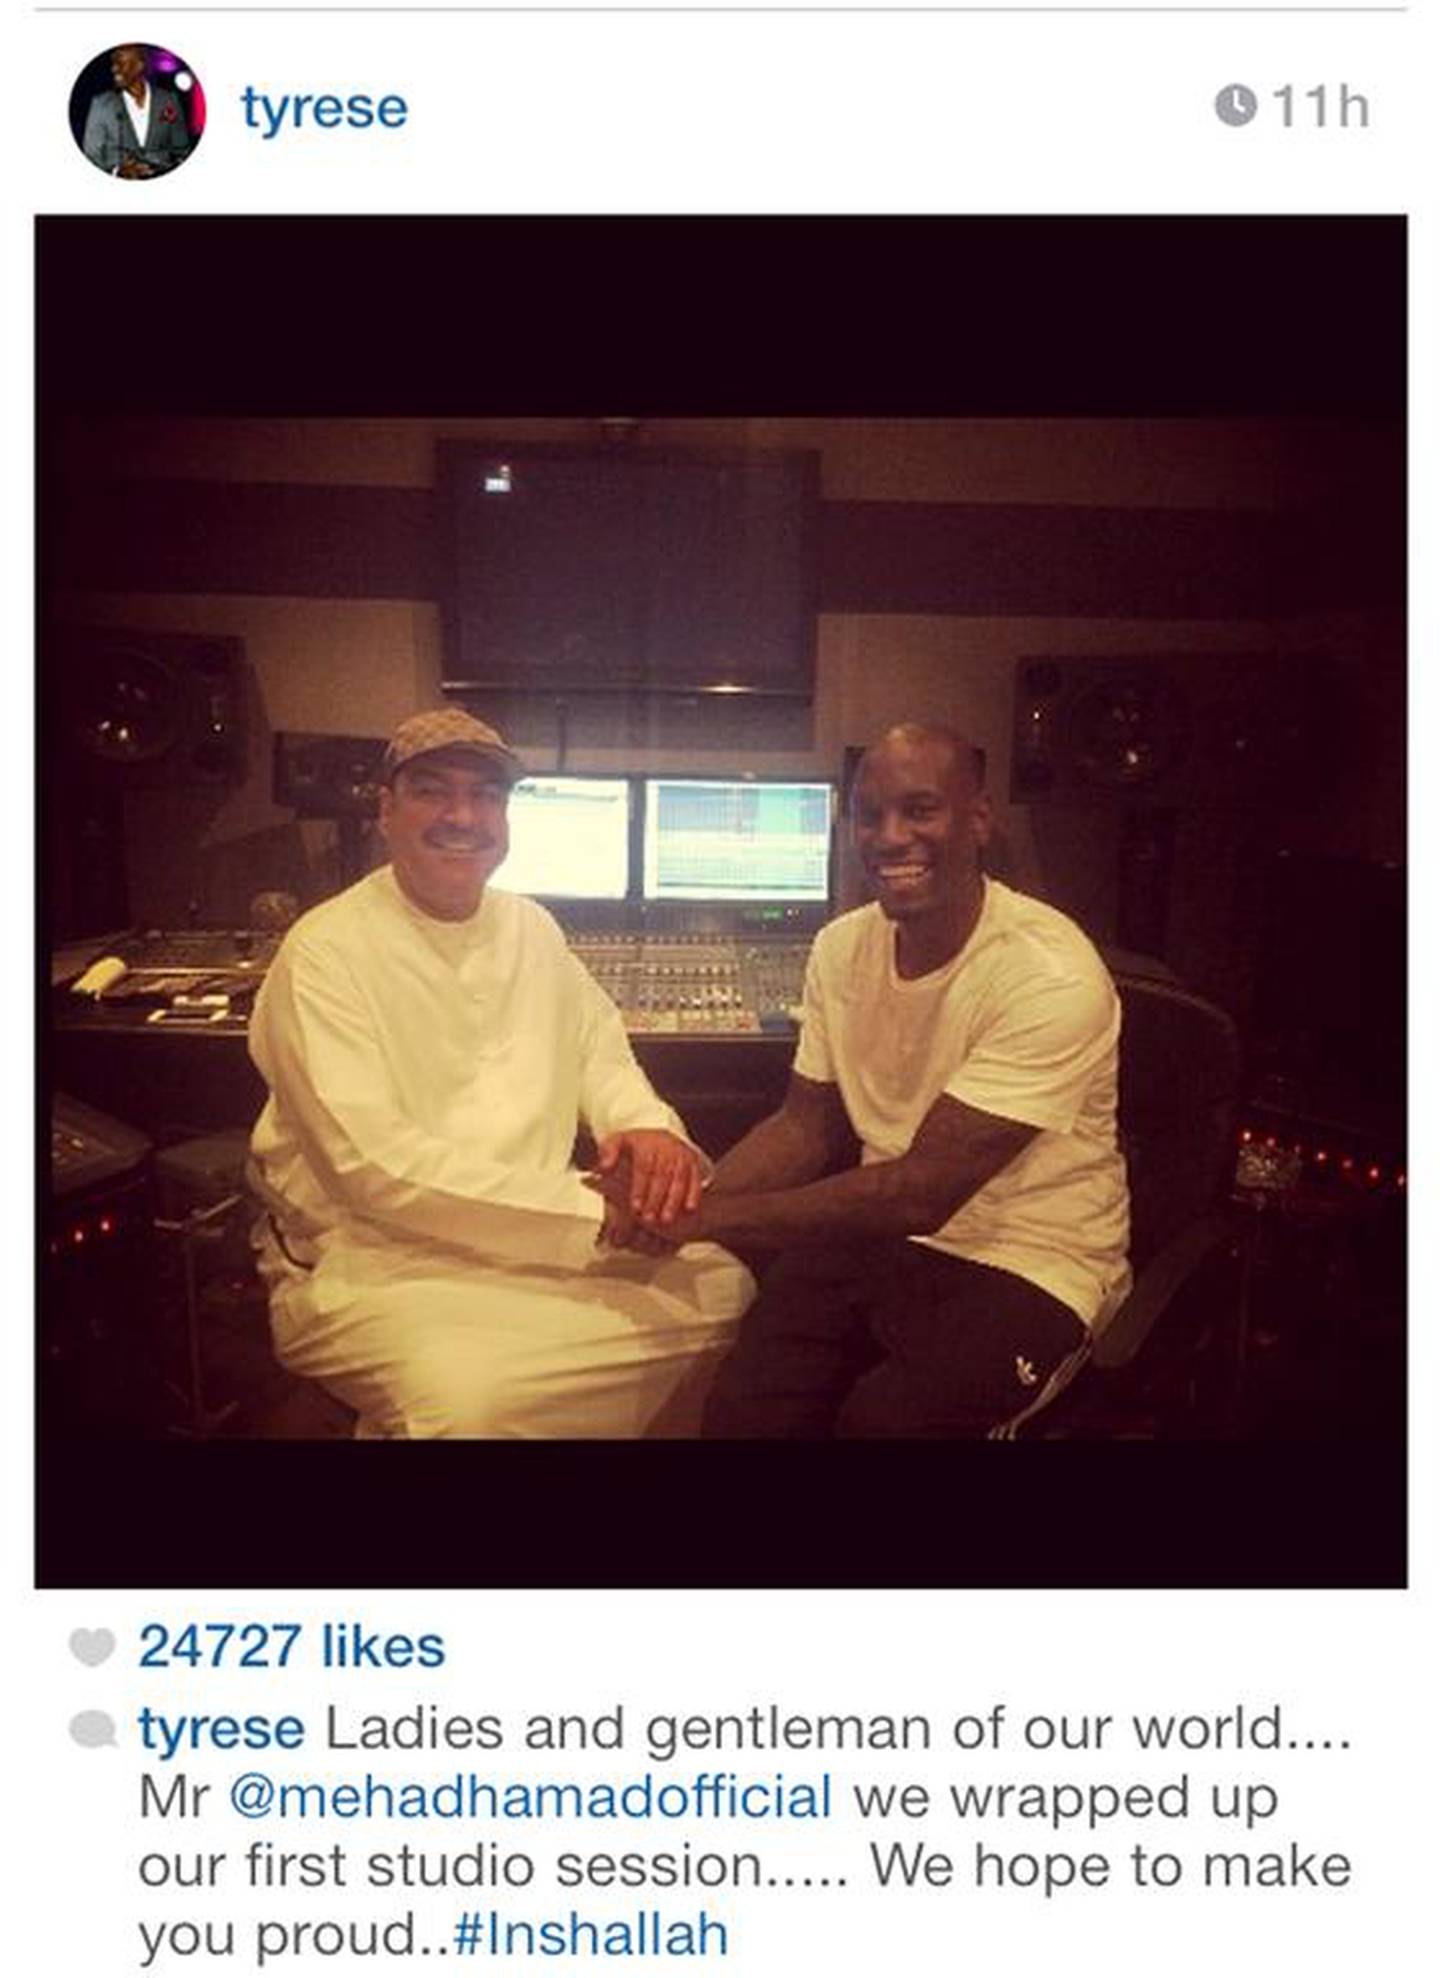 Mehad Hamad and Tyrese in a photo from a recording studio that Tyrese posted on his Instagram account on April 15, 2014.